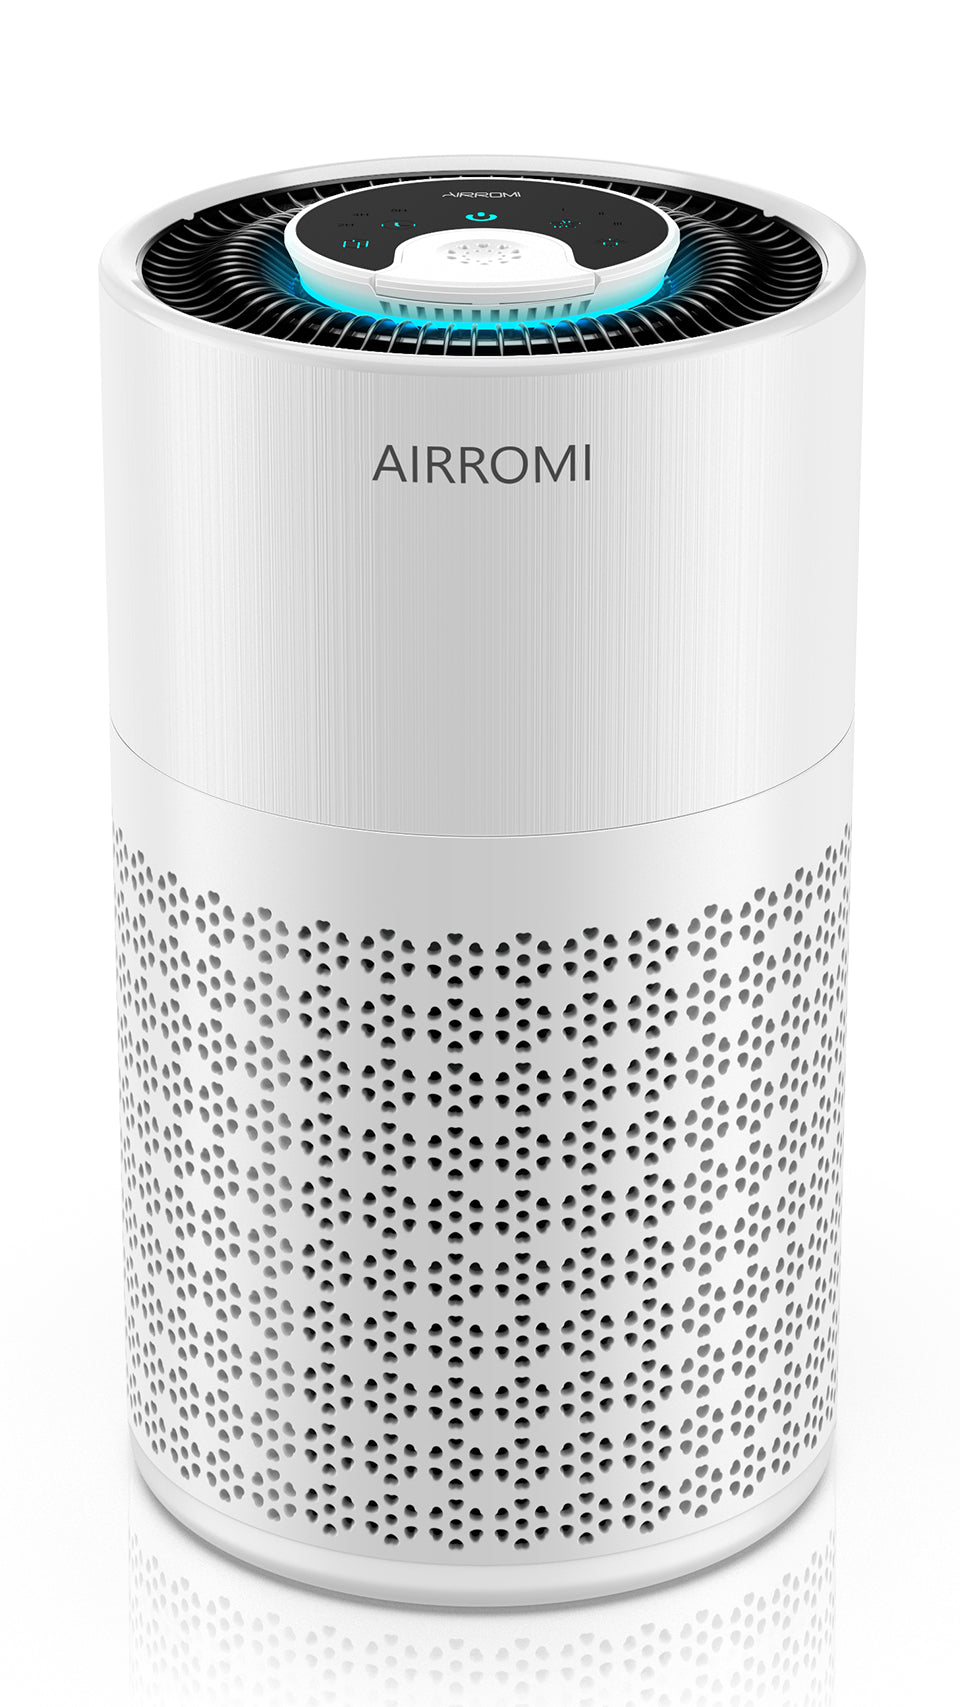 AMIRO Launches Travel Tumbler Sized Air Purifier LX ARP1 with Countless  Features into European Market - PR Newswire APAC